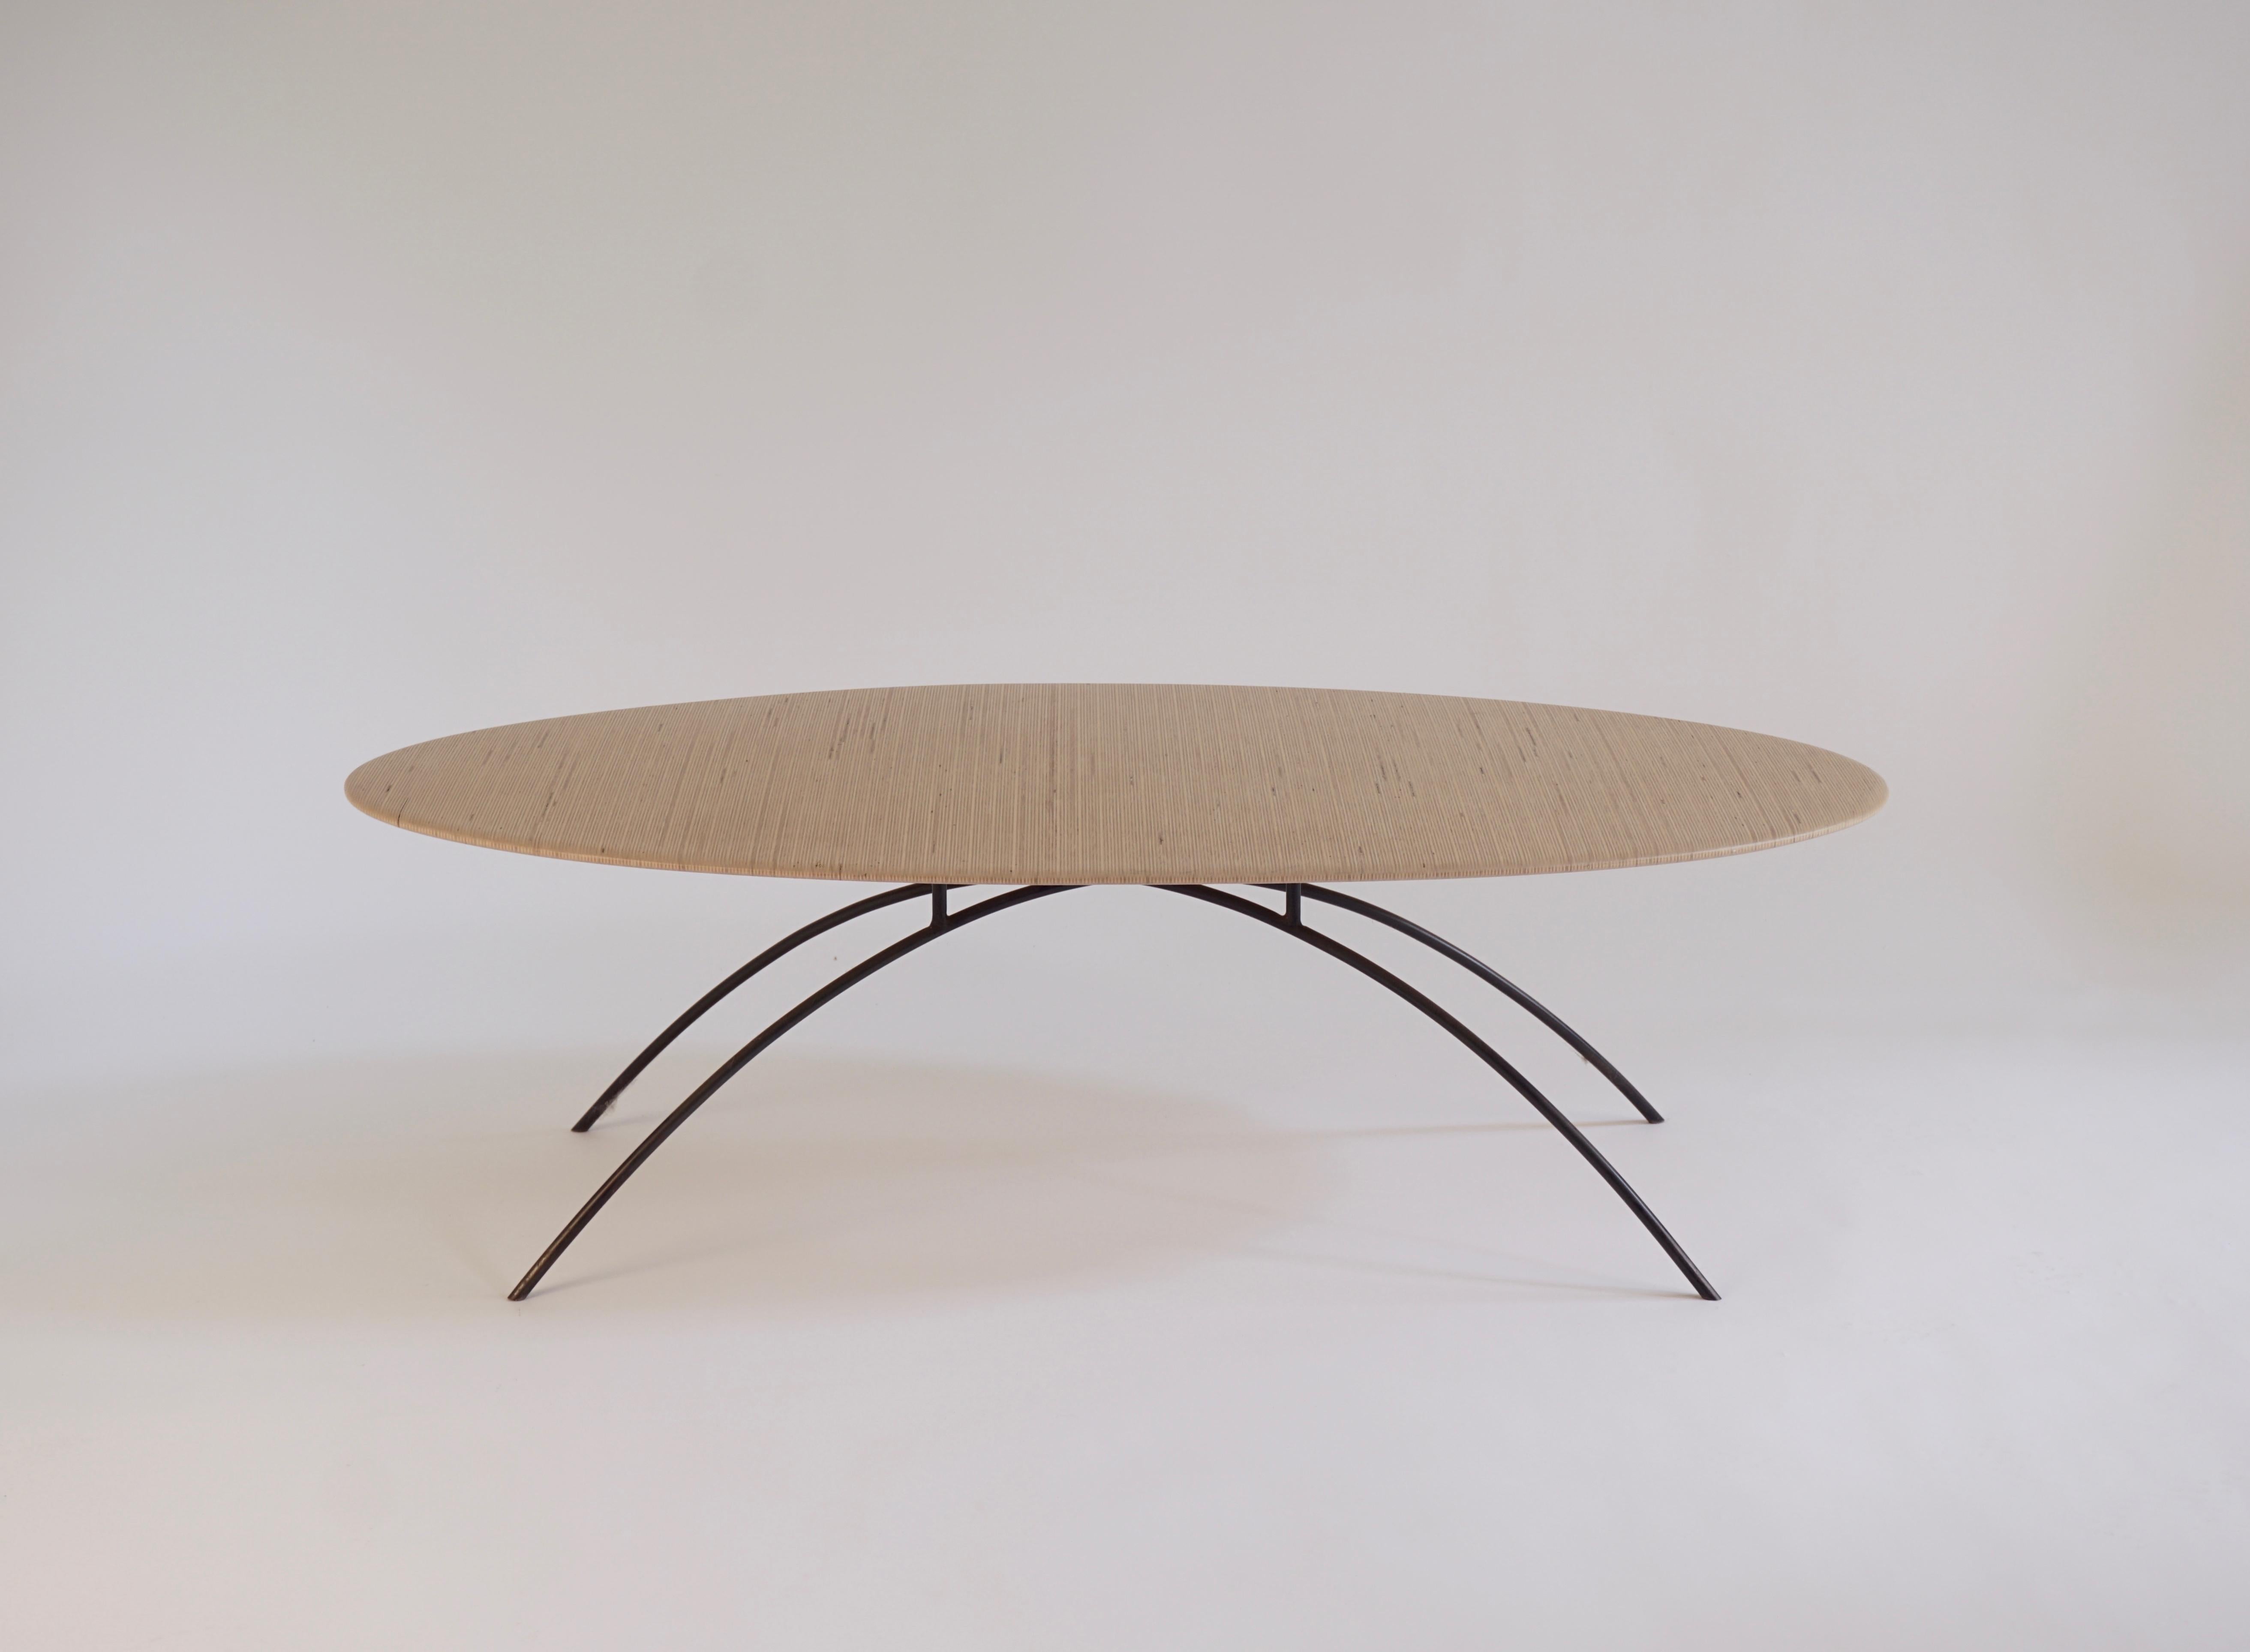 This Oval Coffee Table by Chris Lehrecke is sculpted of laminated Finnland Plywood and has a blackened bronze base. This is an early table from Chris Lehrecke's Brooklyn Studio c.1995. These tables were laminated with multiple pieces of plywood, on